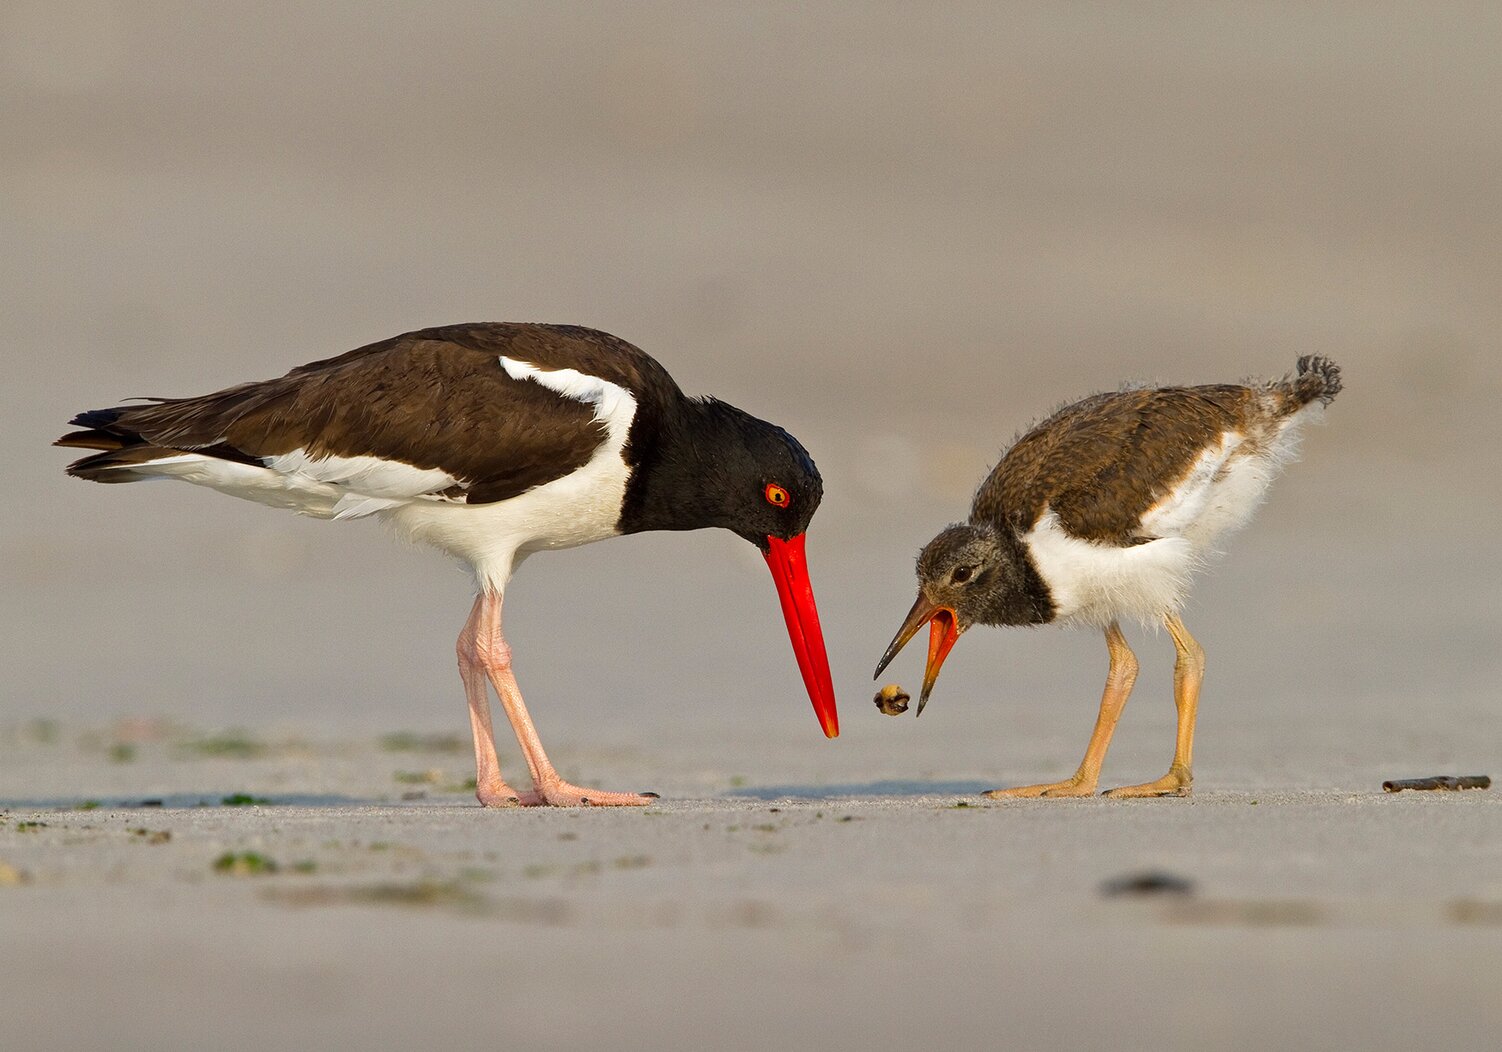 An American Oystercatcher and its chick at Fort Tilden. Photo: François Portmann